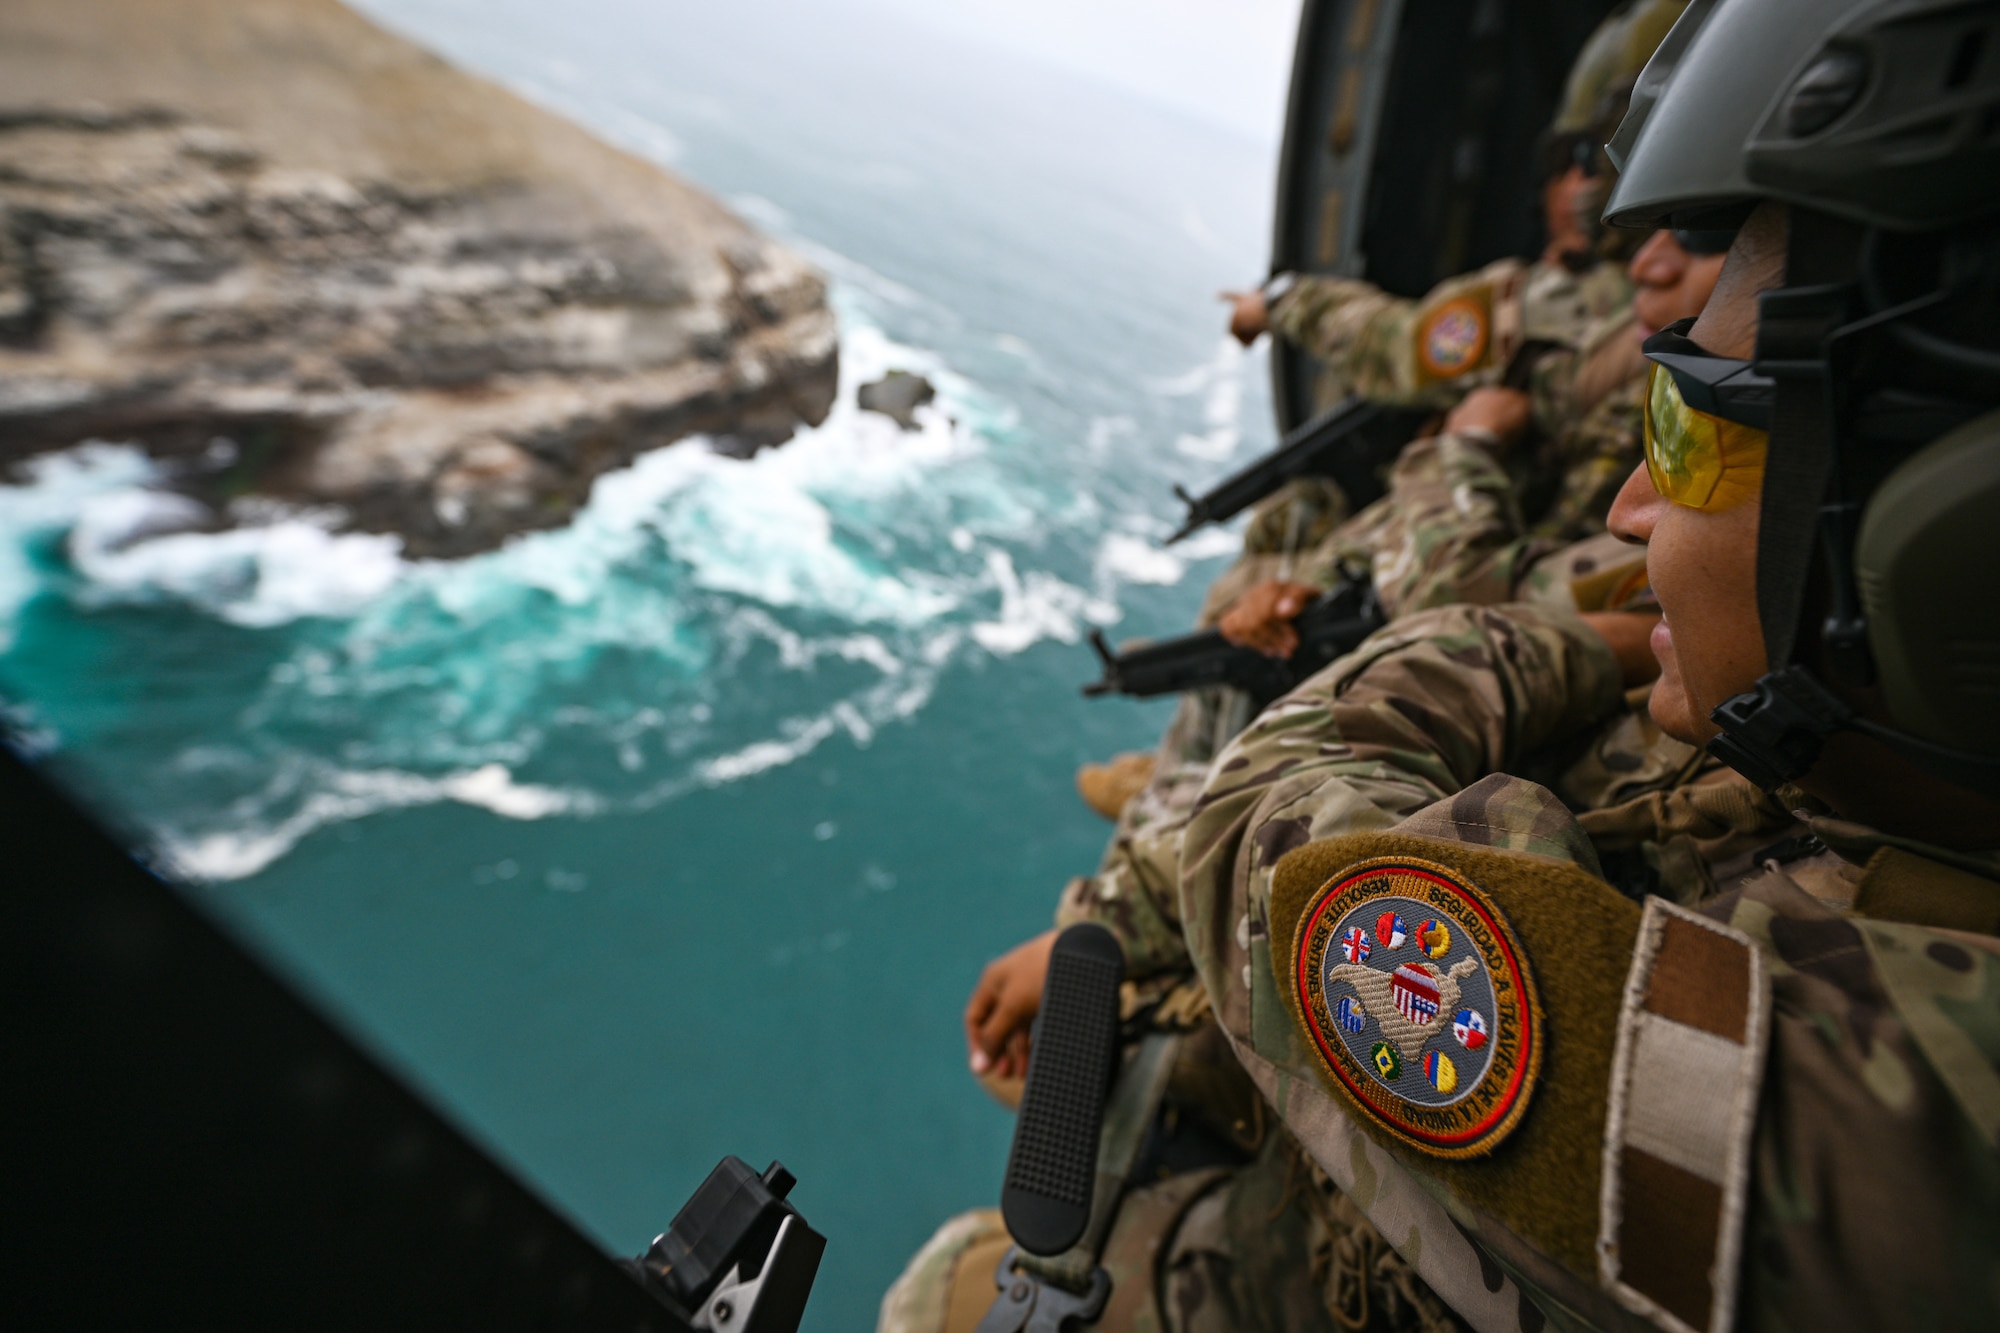 Airmen sit in an aircraft and overlook the sea below